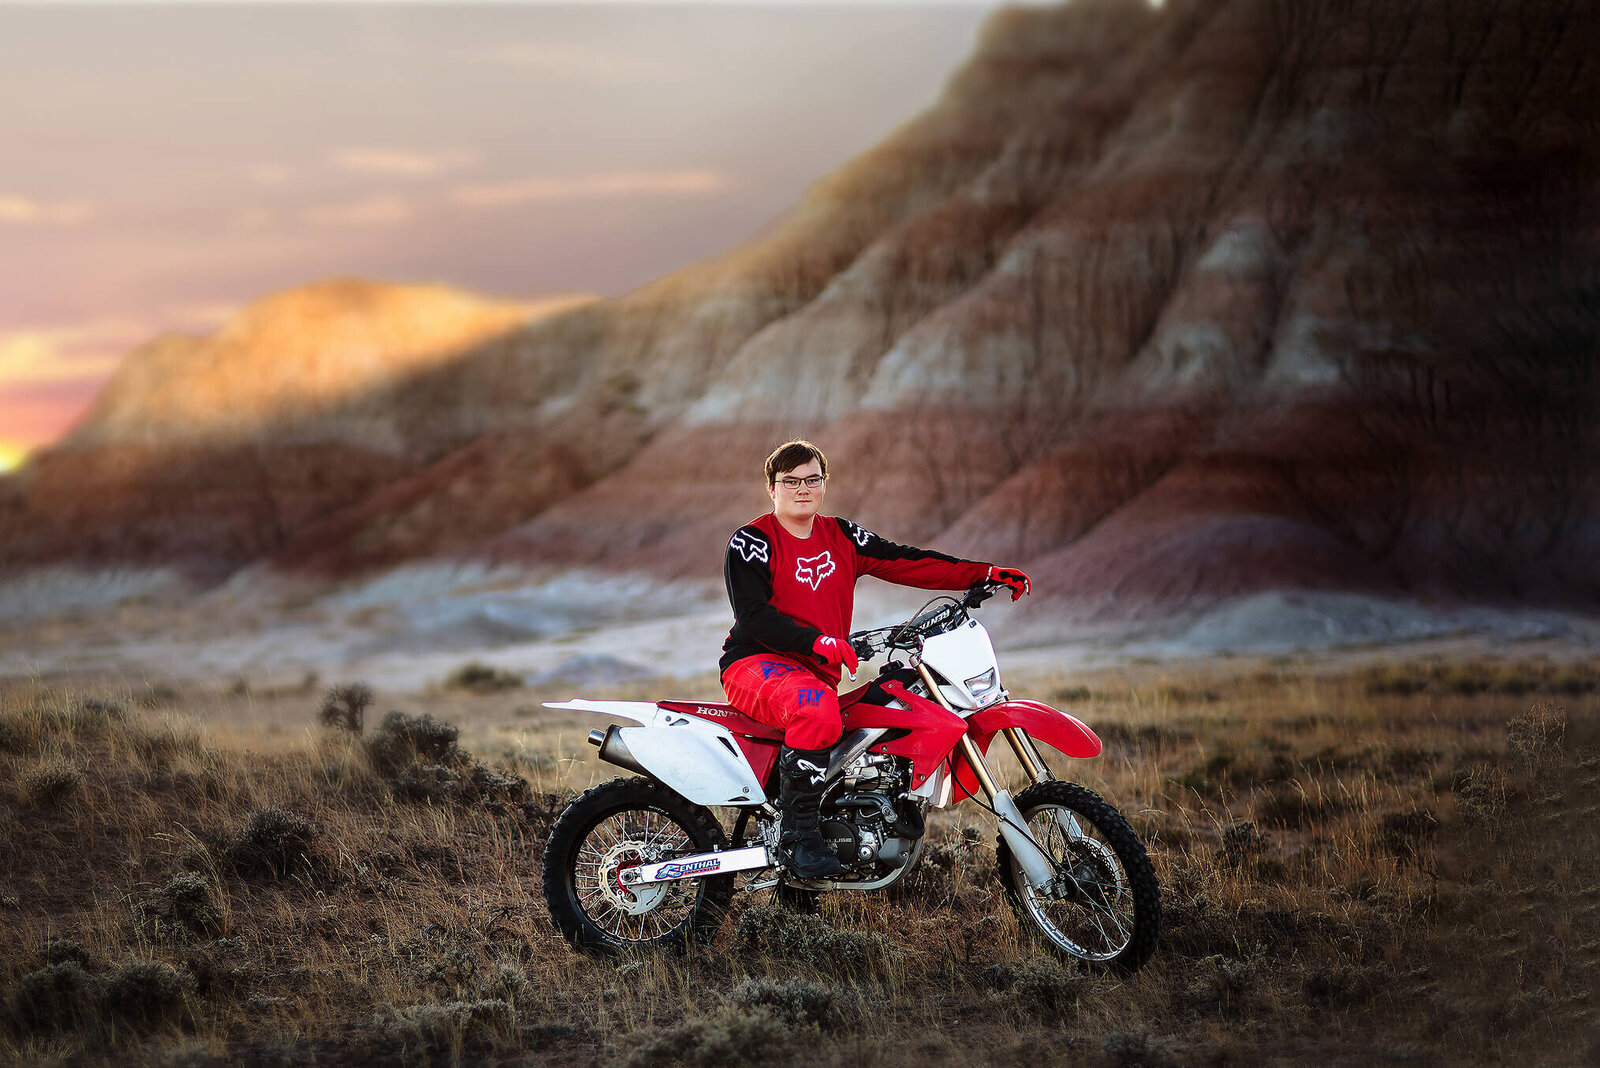 Jackson Hole Senior sitting on his red dirtbike wearing red and black motocross clothing in the desert